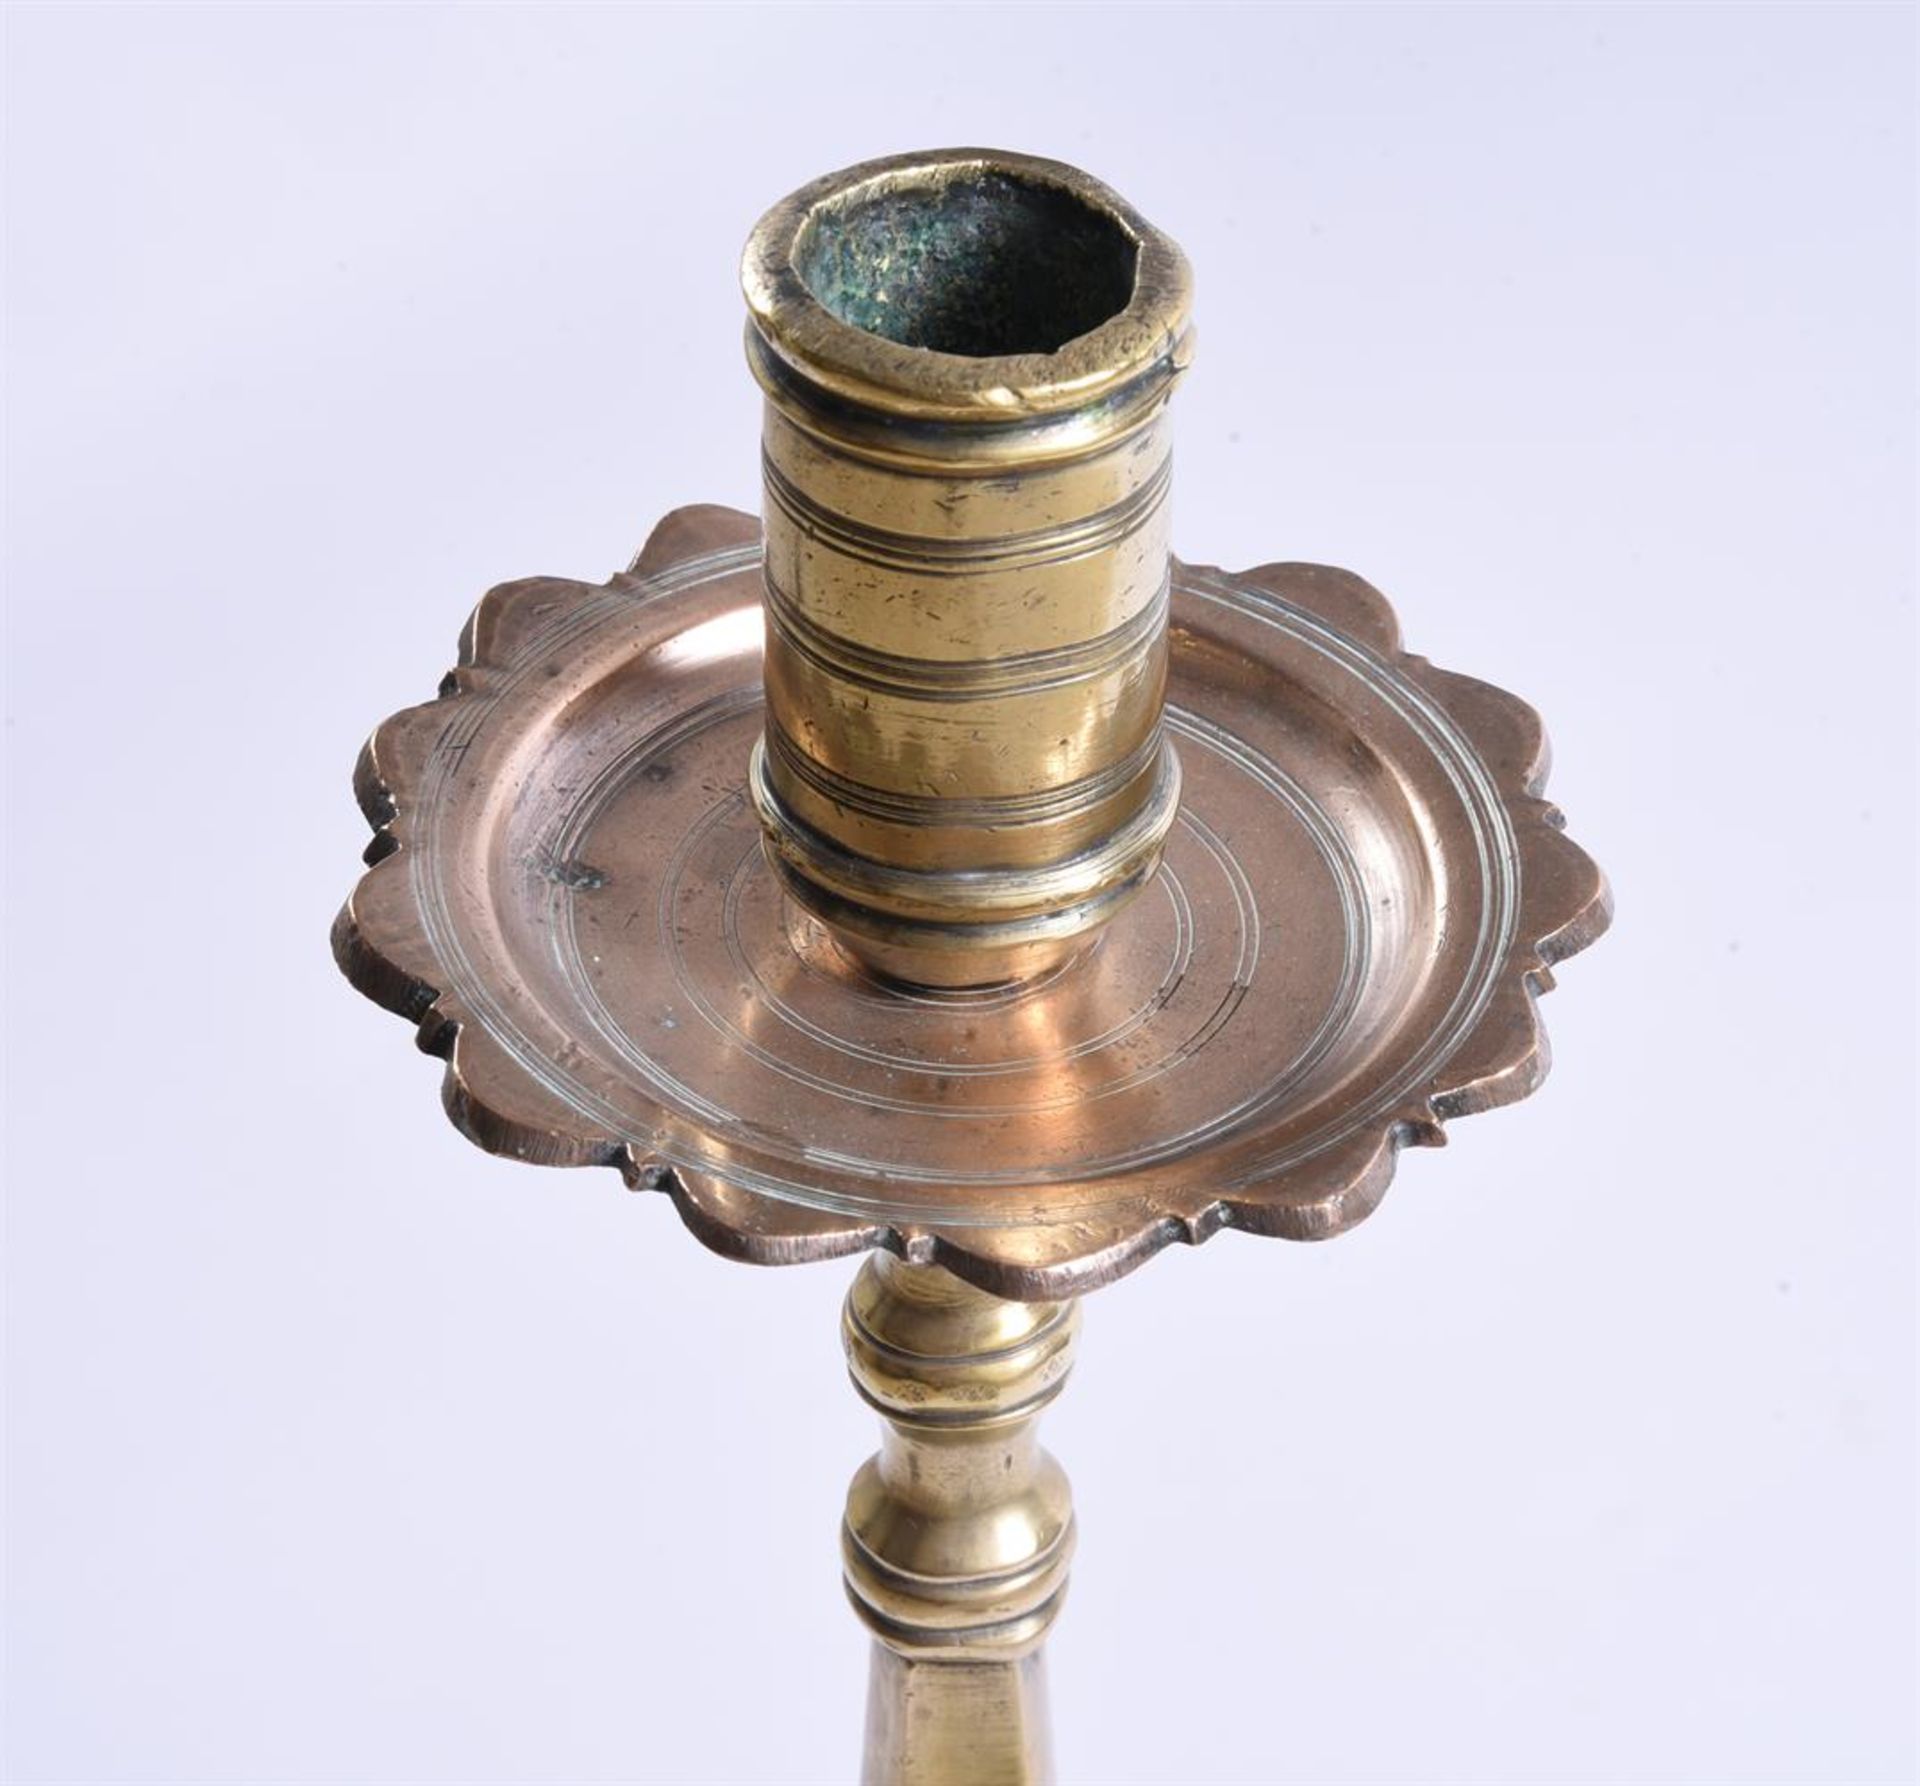 A LARGE BRASS CANDLESTICK, ENGLISH OR DUTCH, 18TH CENTURY - Image 3 of 4